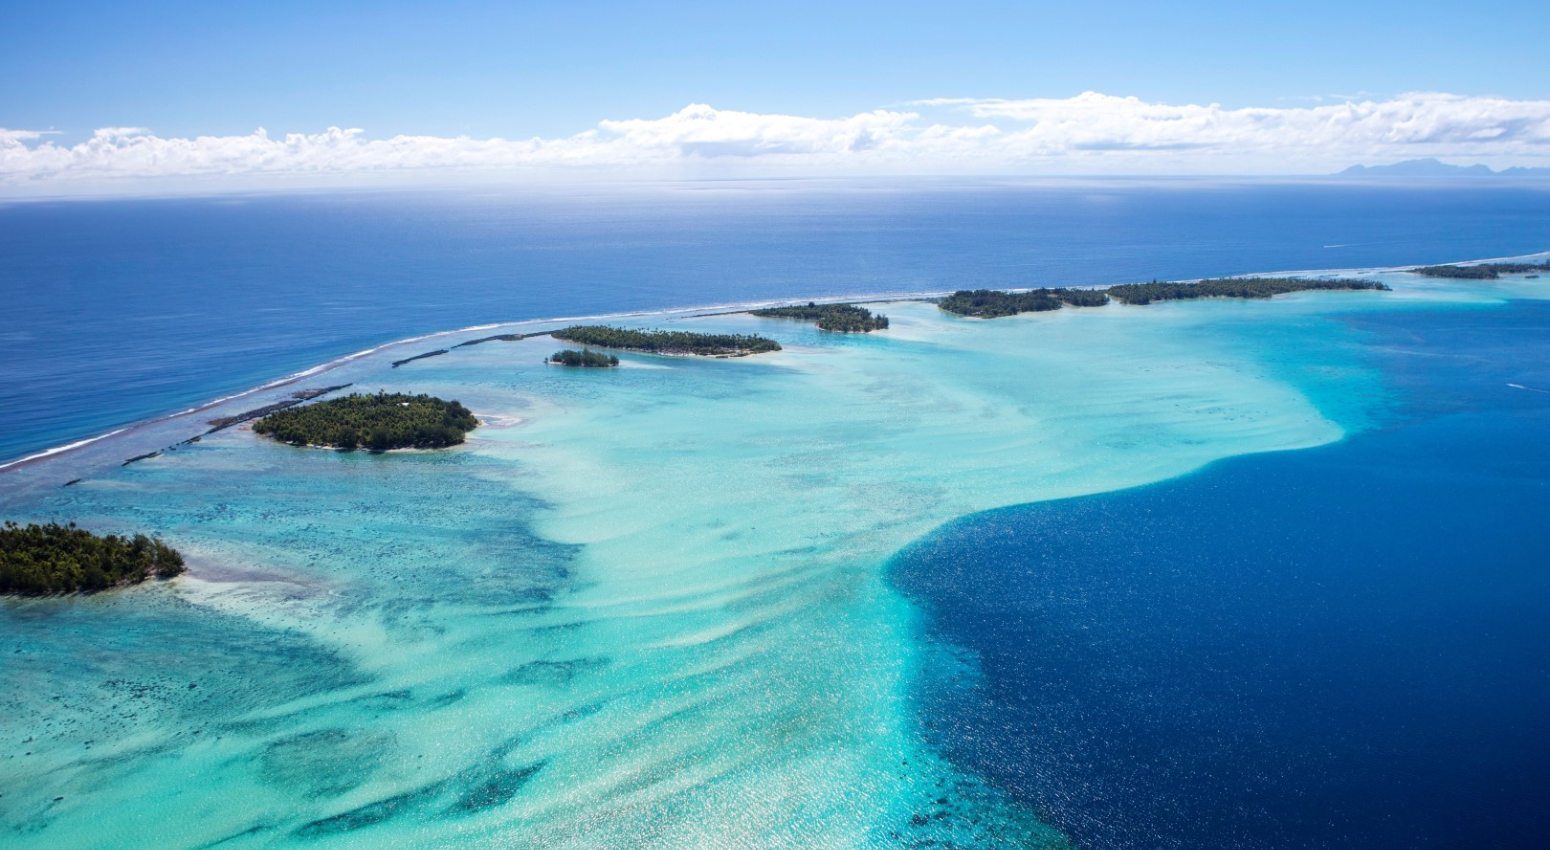 Scenic view of Bora Bora's turquoise waters from a helicopter